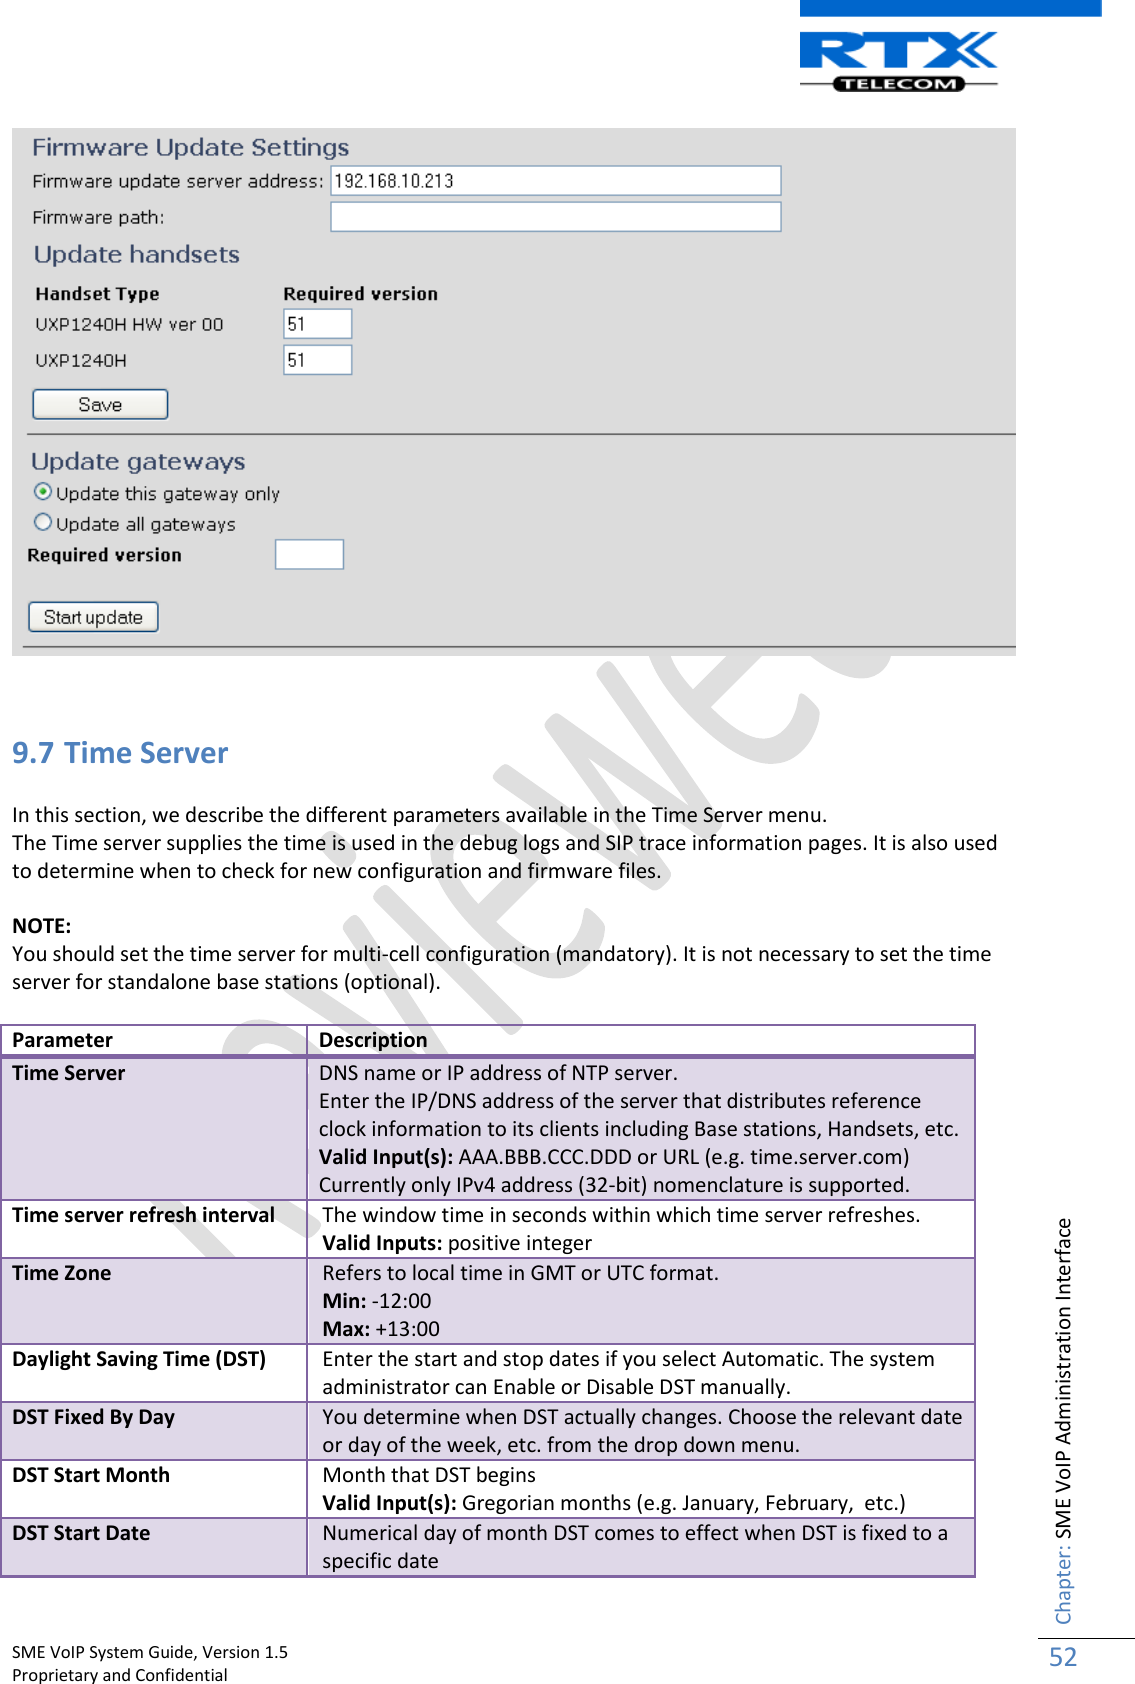    SME VoIP System Guide, Version 1.5                                                                                                                                                          Proprietary and Confidential    Chapter: SME VoIP Administration Interface 52     9.7 Time Server  In this section, we describe the different parameters available in the Time Server menu. The Time server supplies the time is used in the debug logs and SIP trace information pages. It is also used to determine when to check for new configuration and firmware files.   NOTE: You should set the time server for multi-cell configuration (mandatory). It is not necessary to set the time server for standalone base stations (optional).  Parameter Description Time Server DNS name or IP address of NTP server. Enter the IP/DNS address of the server that distributes reference clock information to its clients including Base stations, Handsets, etc. Valid Input(s): AAA.BBB.CCC.DDD or URL (e.g. time.server.com) Currently only IPv4 address (32-bit) nomenclature is supported. Time server refresh interval The window time in seconds within which time server refreshes. Valid Inputs: positive integer Time Zone Refers to local time in GMT or UTC format.  Min: -12:00 Max: +13:00 Daylight Saving Time (DST) Enter the start and stop dates if you select Automatic. The system administrator can Enable or Disable DST manually. DST Fixed By Day You determine when DST actually changes. Choose the relevant date or day of the week, etc. from the drop down menu. DST Start Month Month that DST begins Valid Input(s): Gregorian months (e.g. January, February,  etc.) DST Start Date Numerical day of month DST comes to effect when DST is fixed to a specific date 